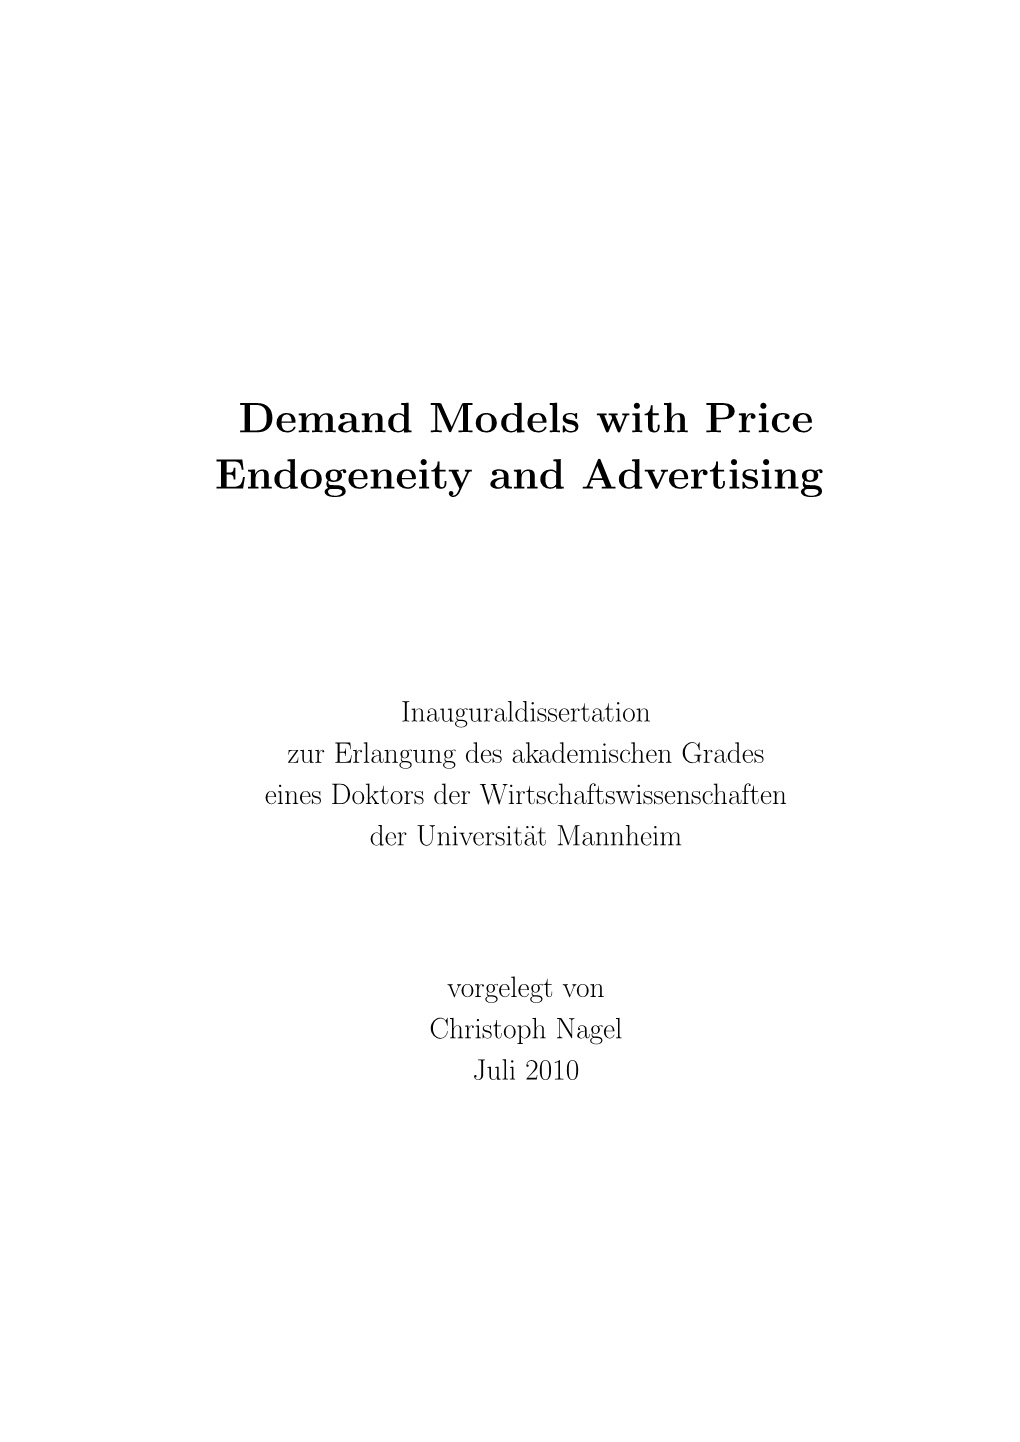 Demand Models with Price Endogeneity and Advertising